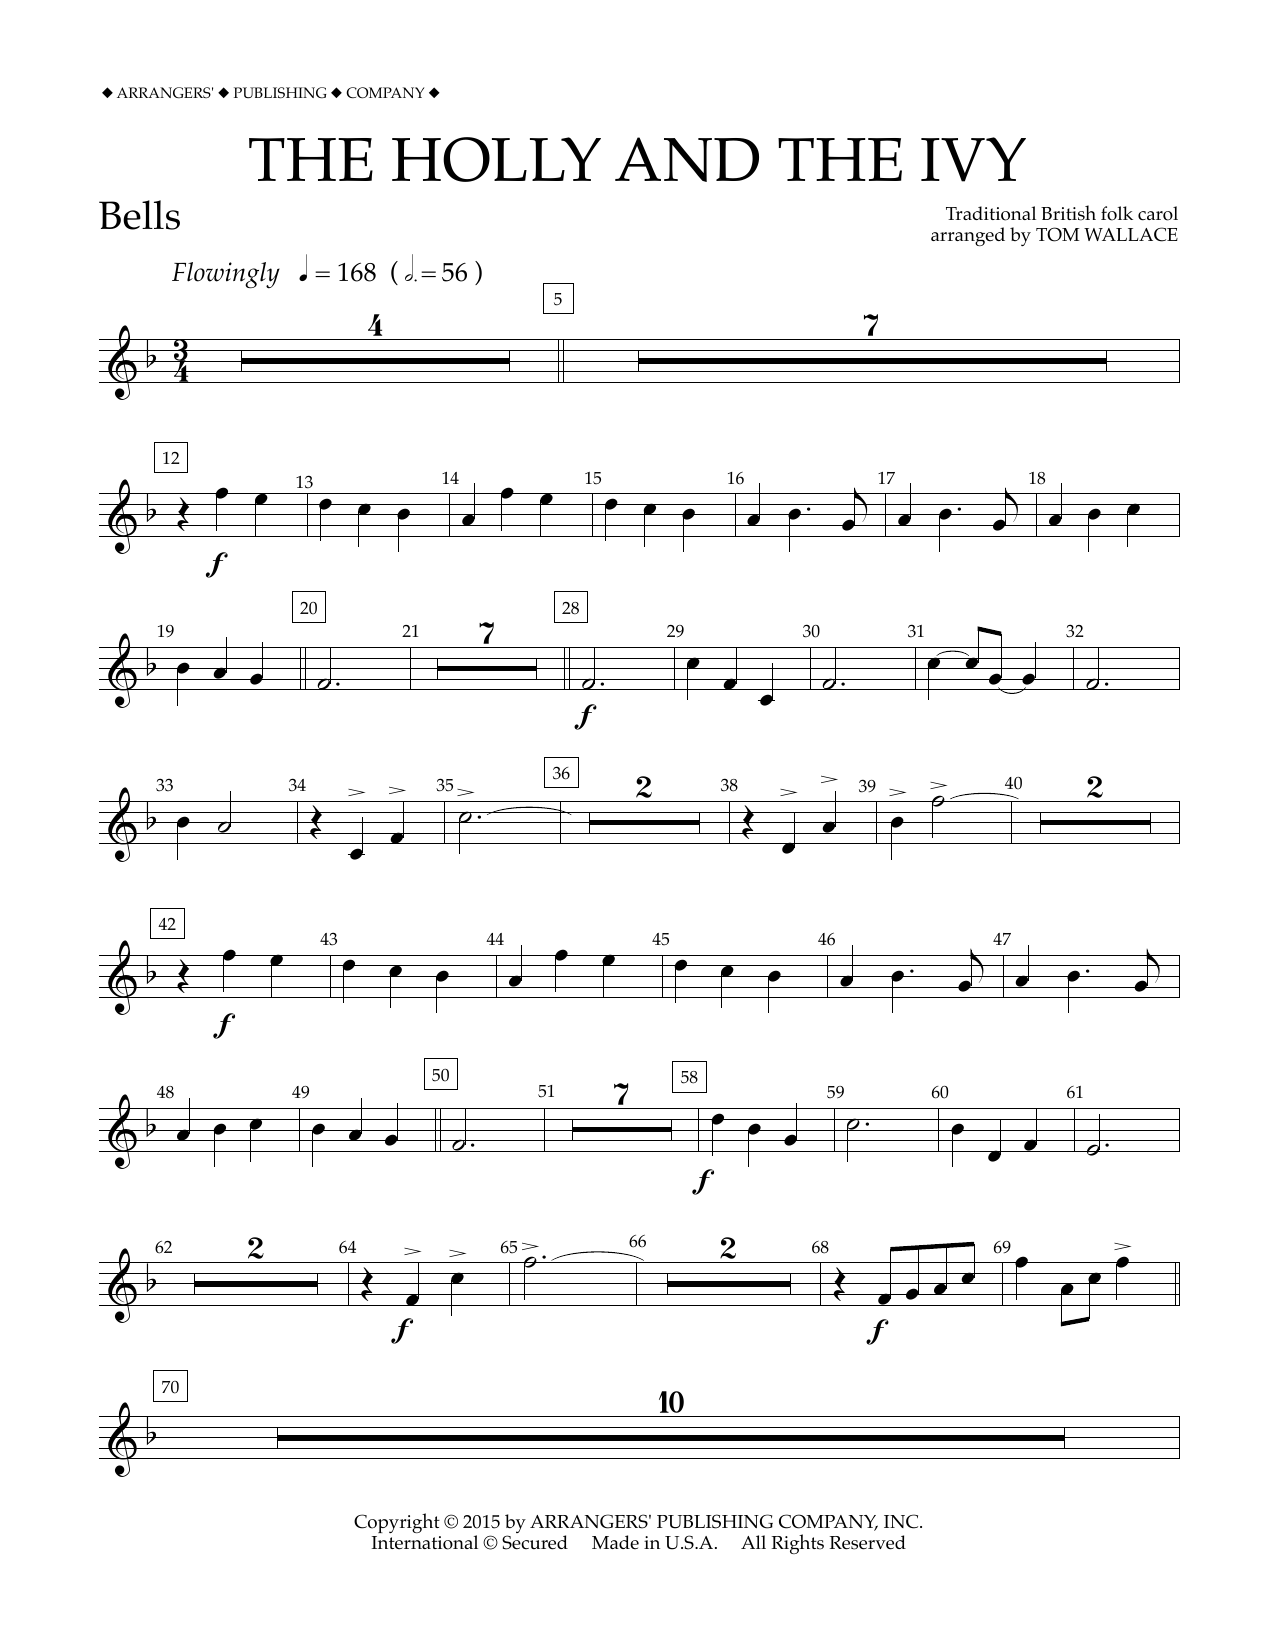 Download Tom Wallace The Holly and the Ivy - Bells Sheet Music